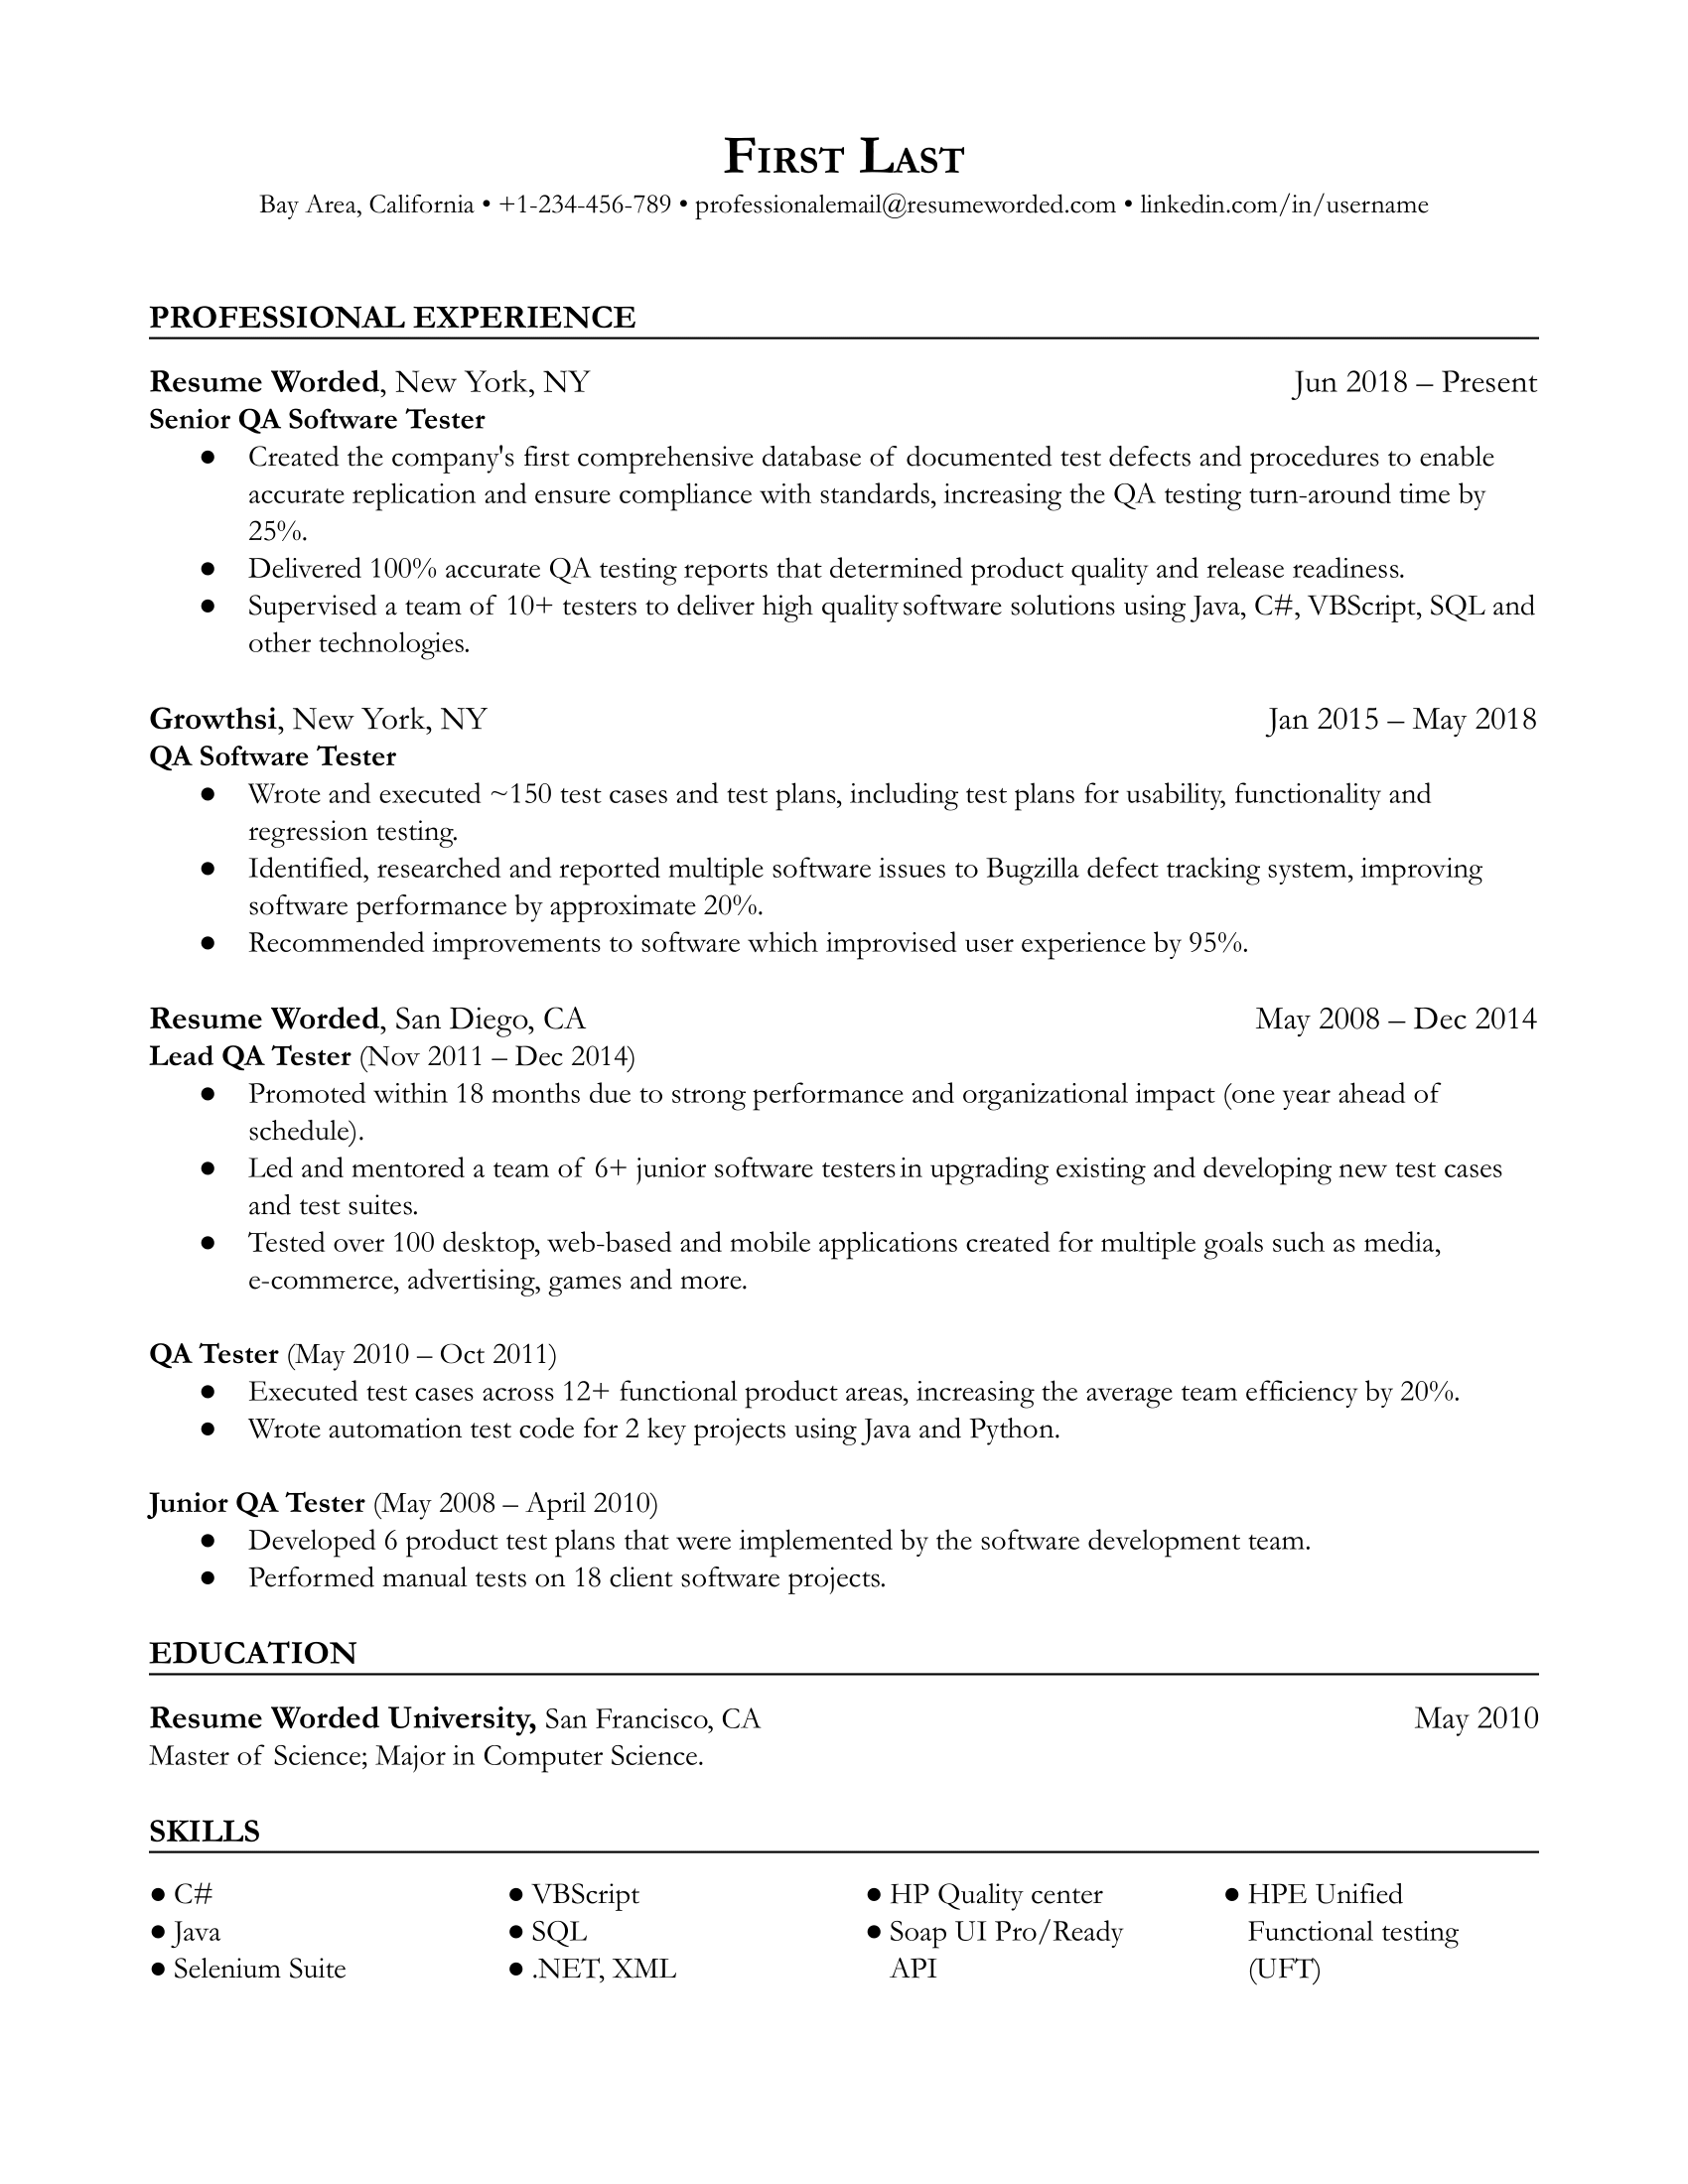 A sample QA Tester resume for those who want a role that works through the lifecycle of software development, eliminating software bugs along the way. 